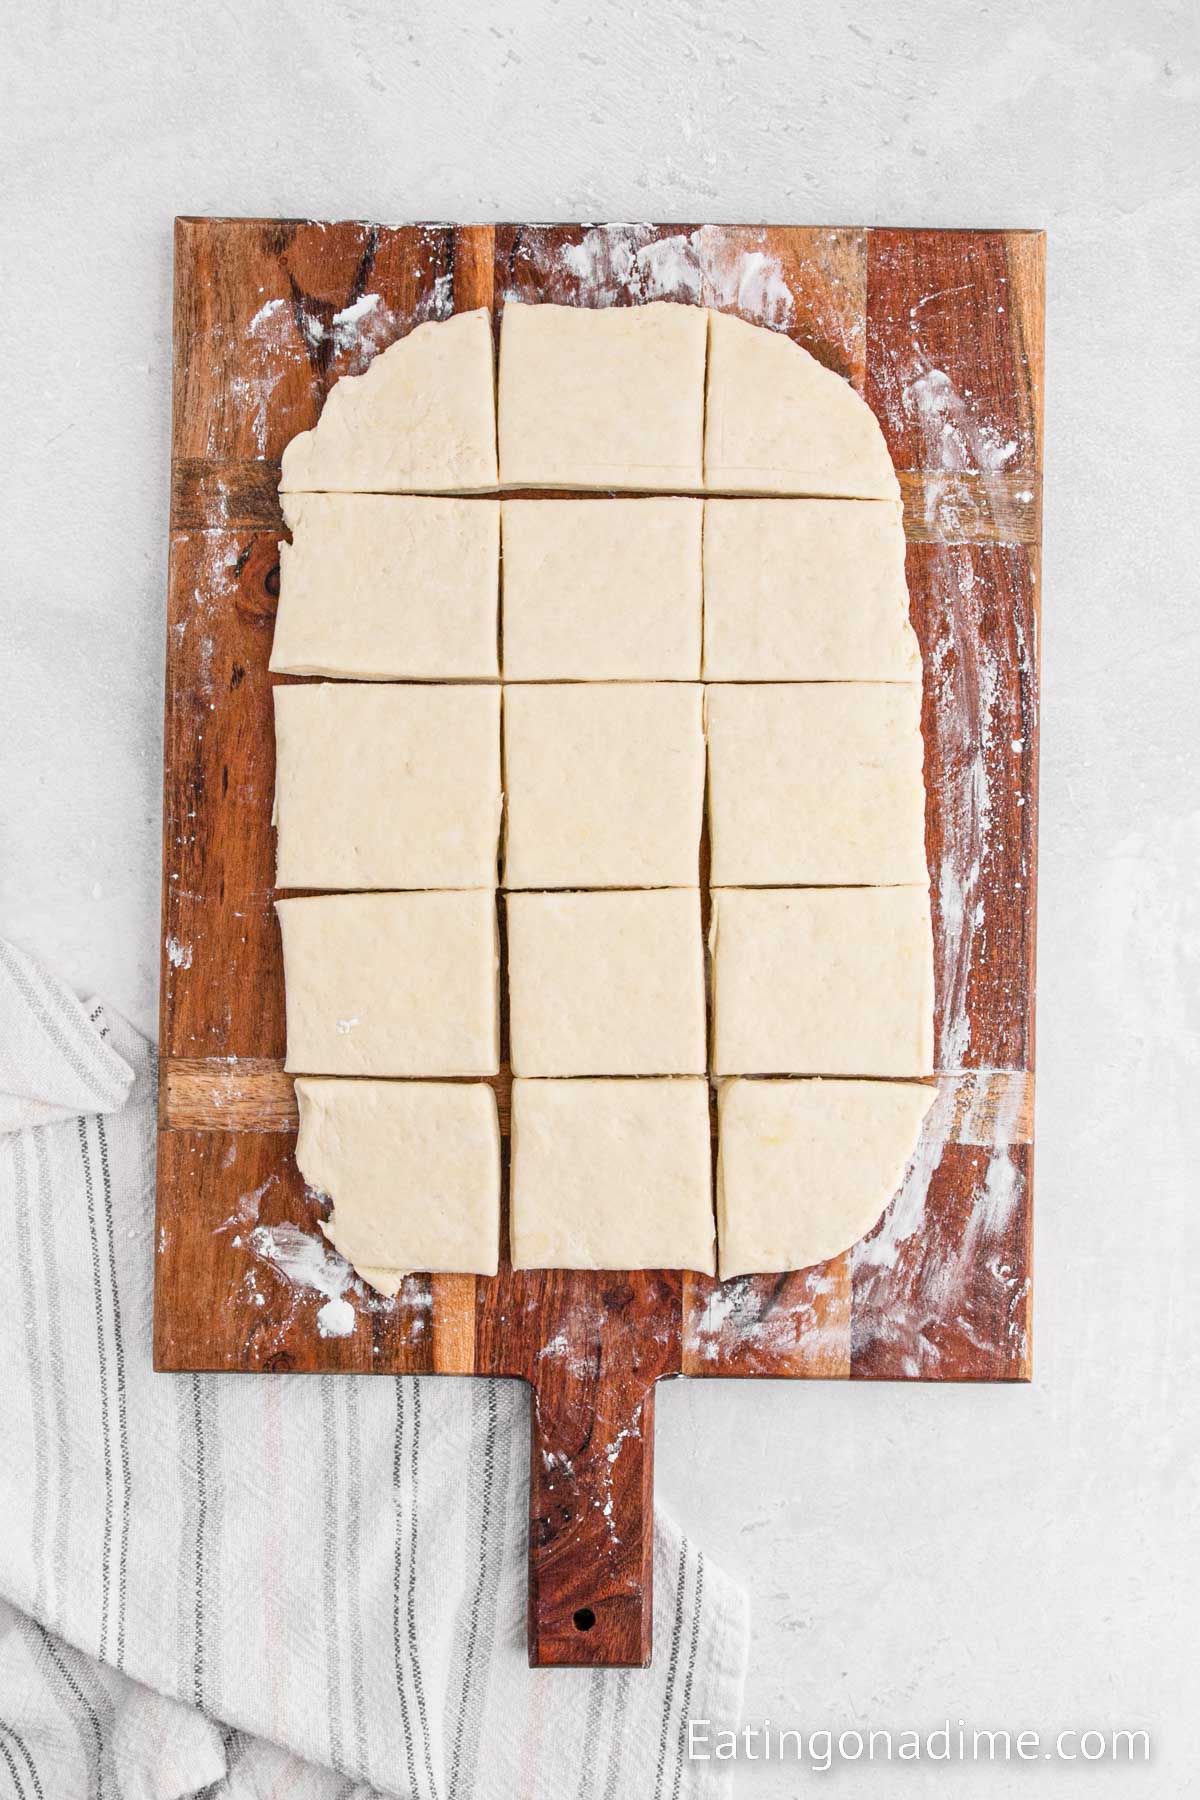 Biscuit dough cut into pieces on a cutting board